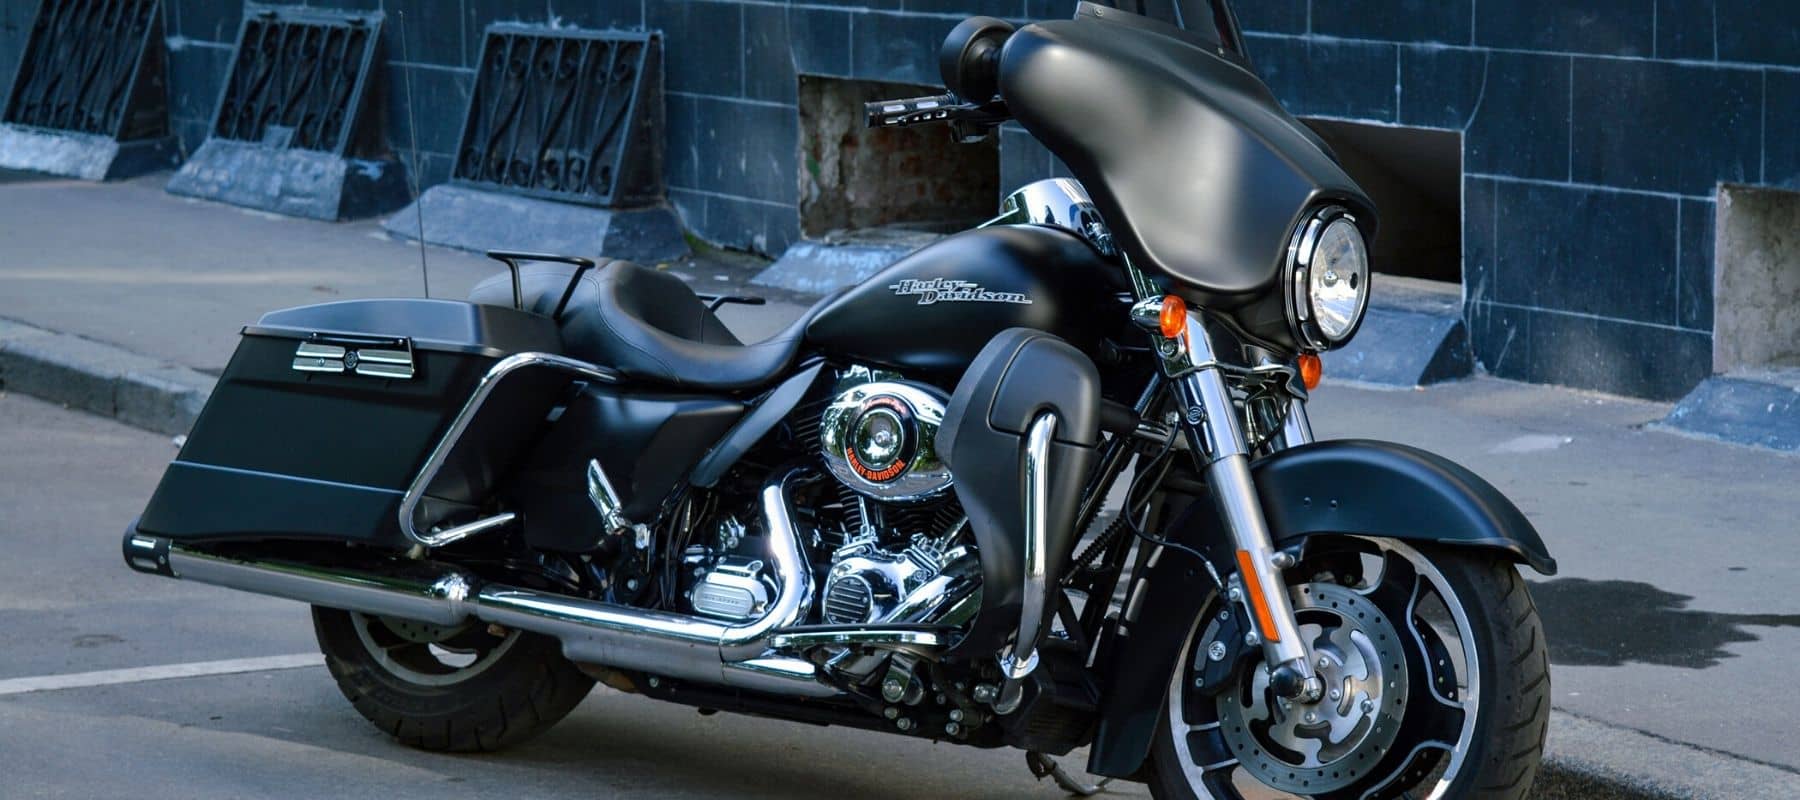 Best Motorcycle Detailing Tips and Procedures - Pristine Auto Detail